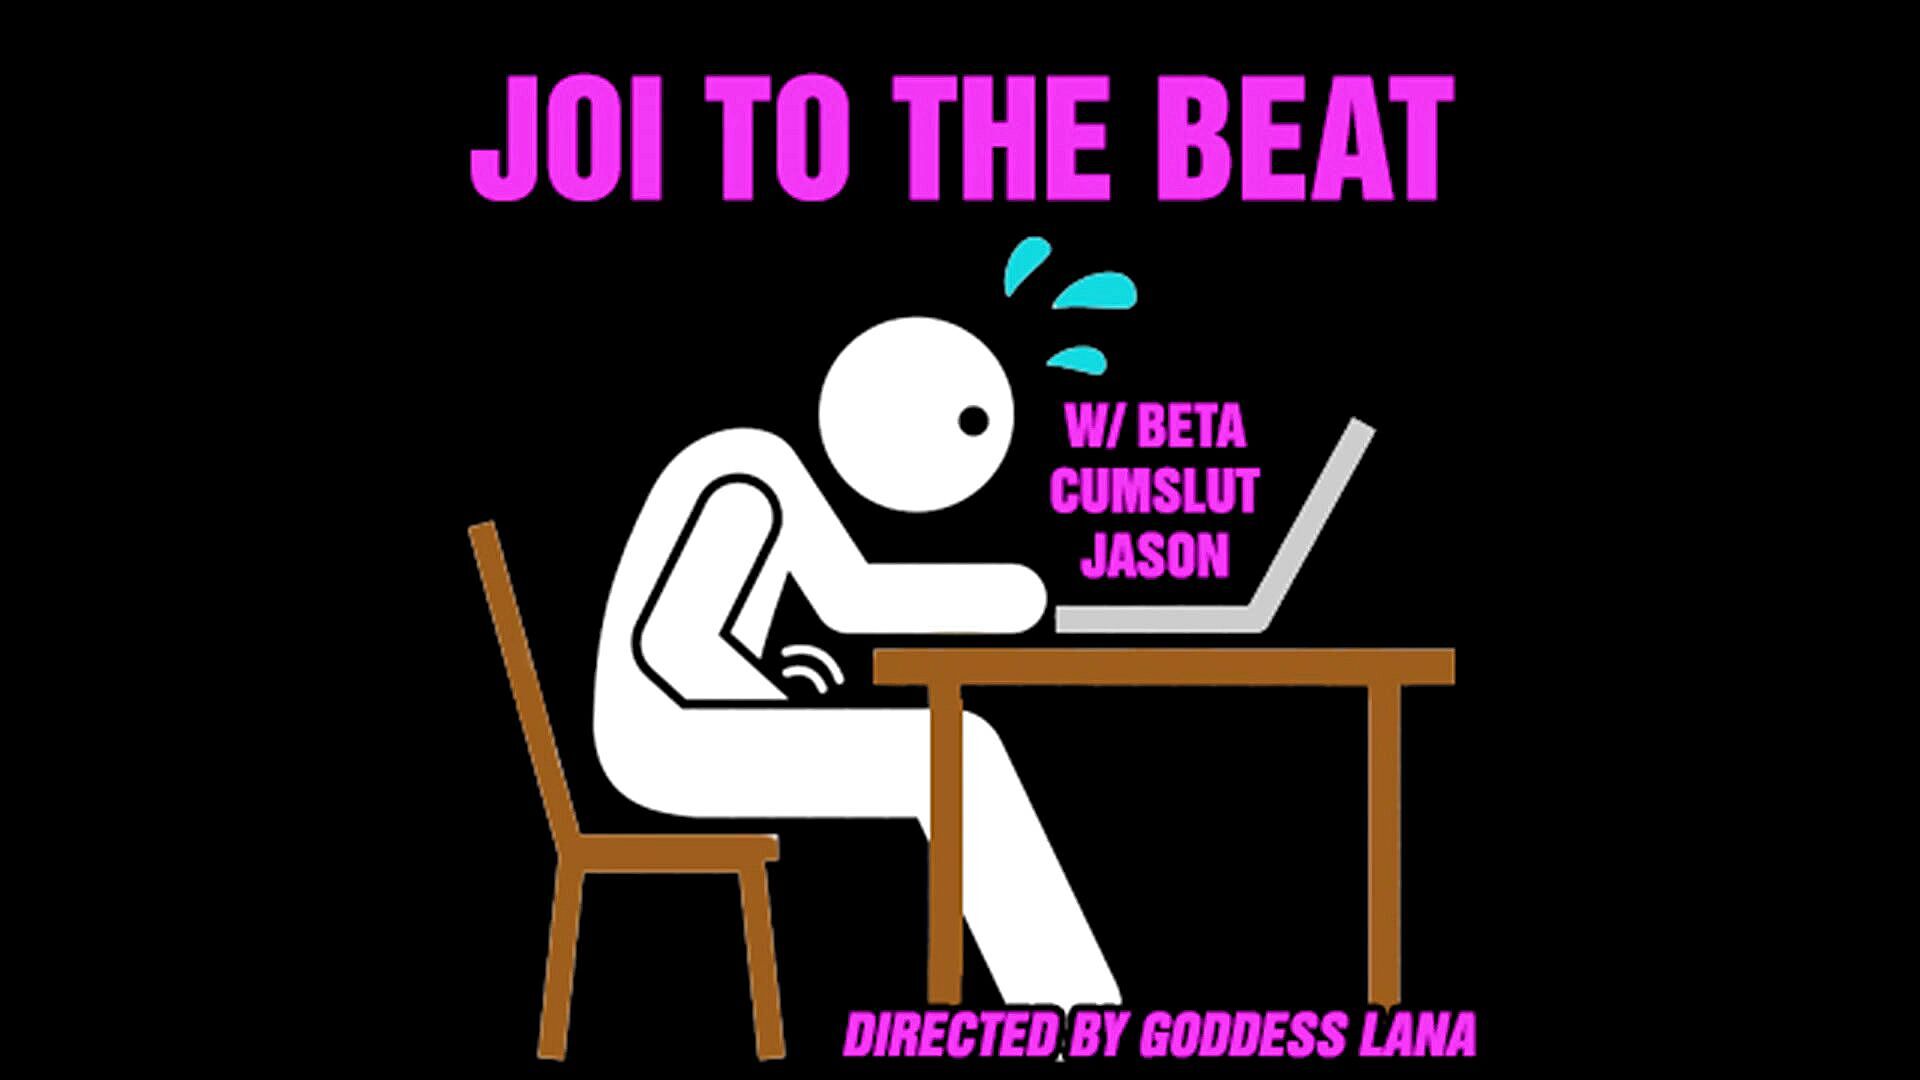 Joi to the beat